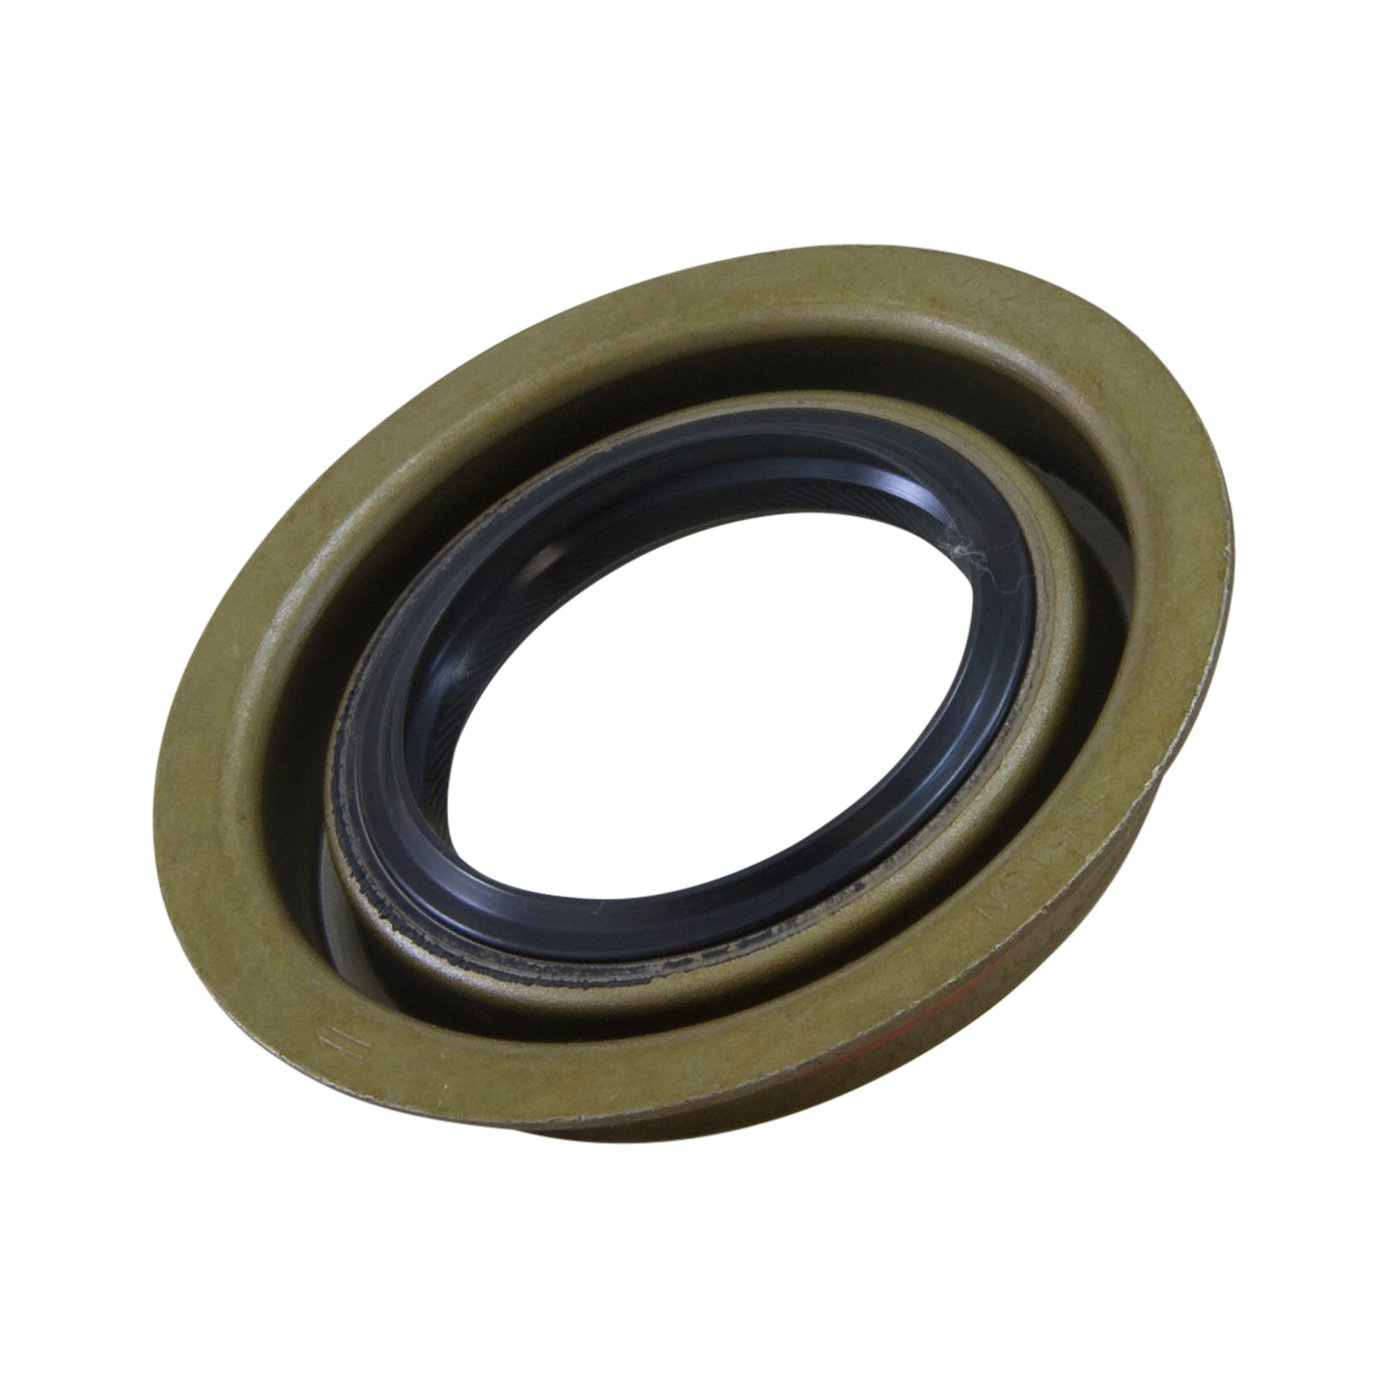 7.25 in. & 8.25 in. Chrysler Pinion Seal